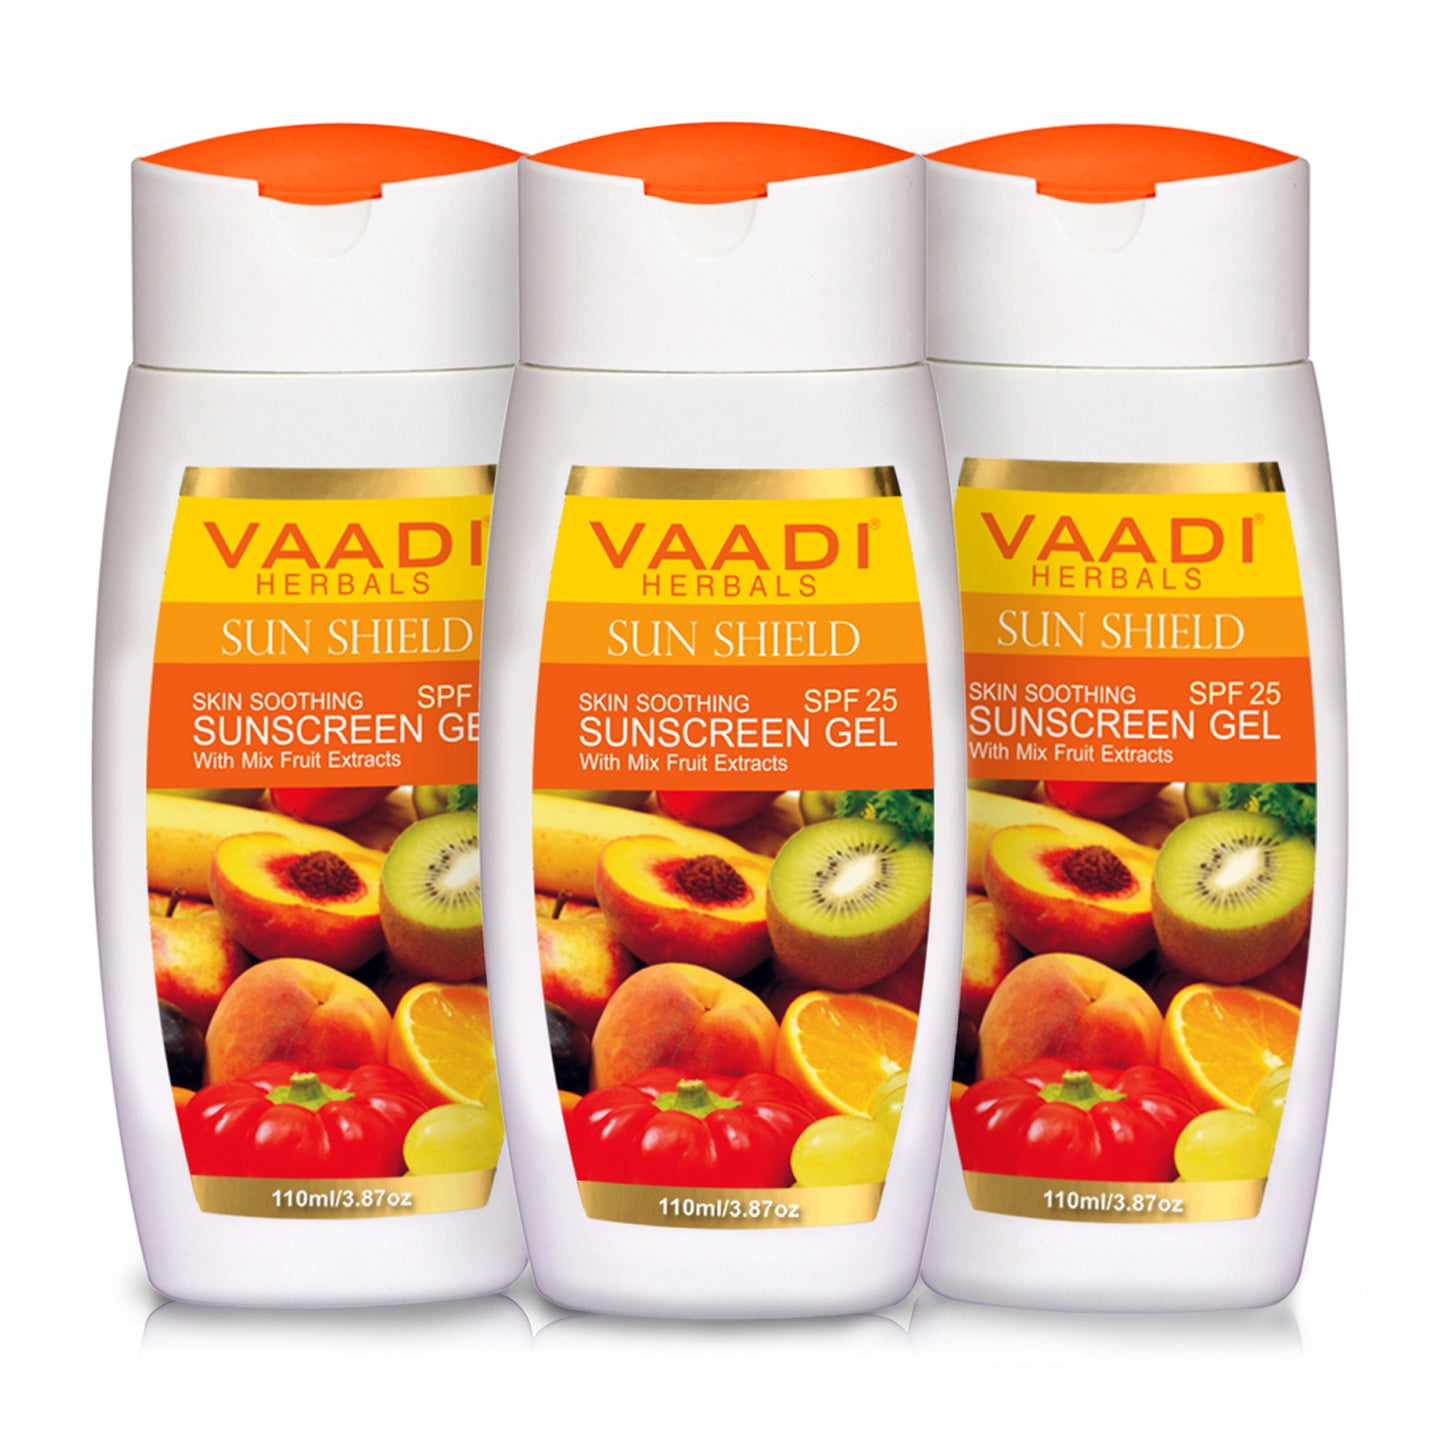 Sunscreen Gel With Mix Fruit Extract SPF 25 (3 x 110 gms / 4 oz)